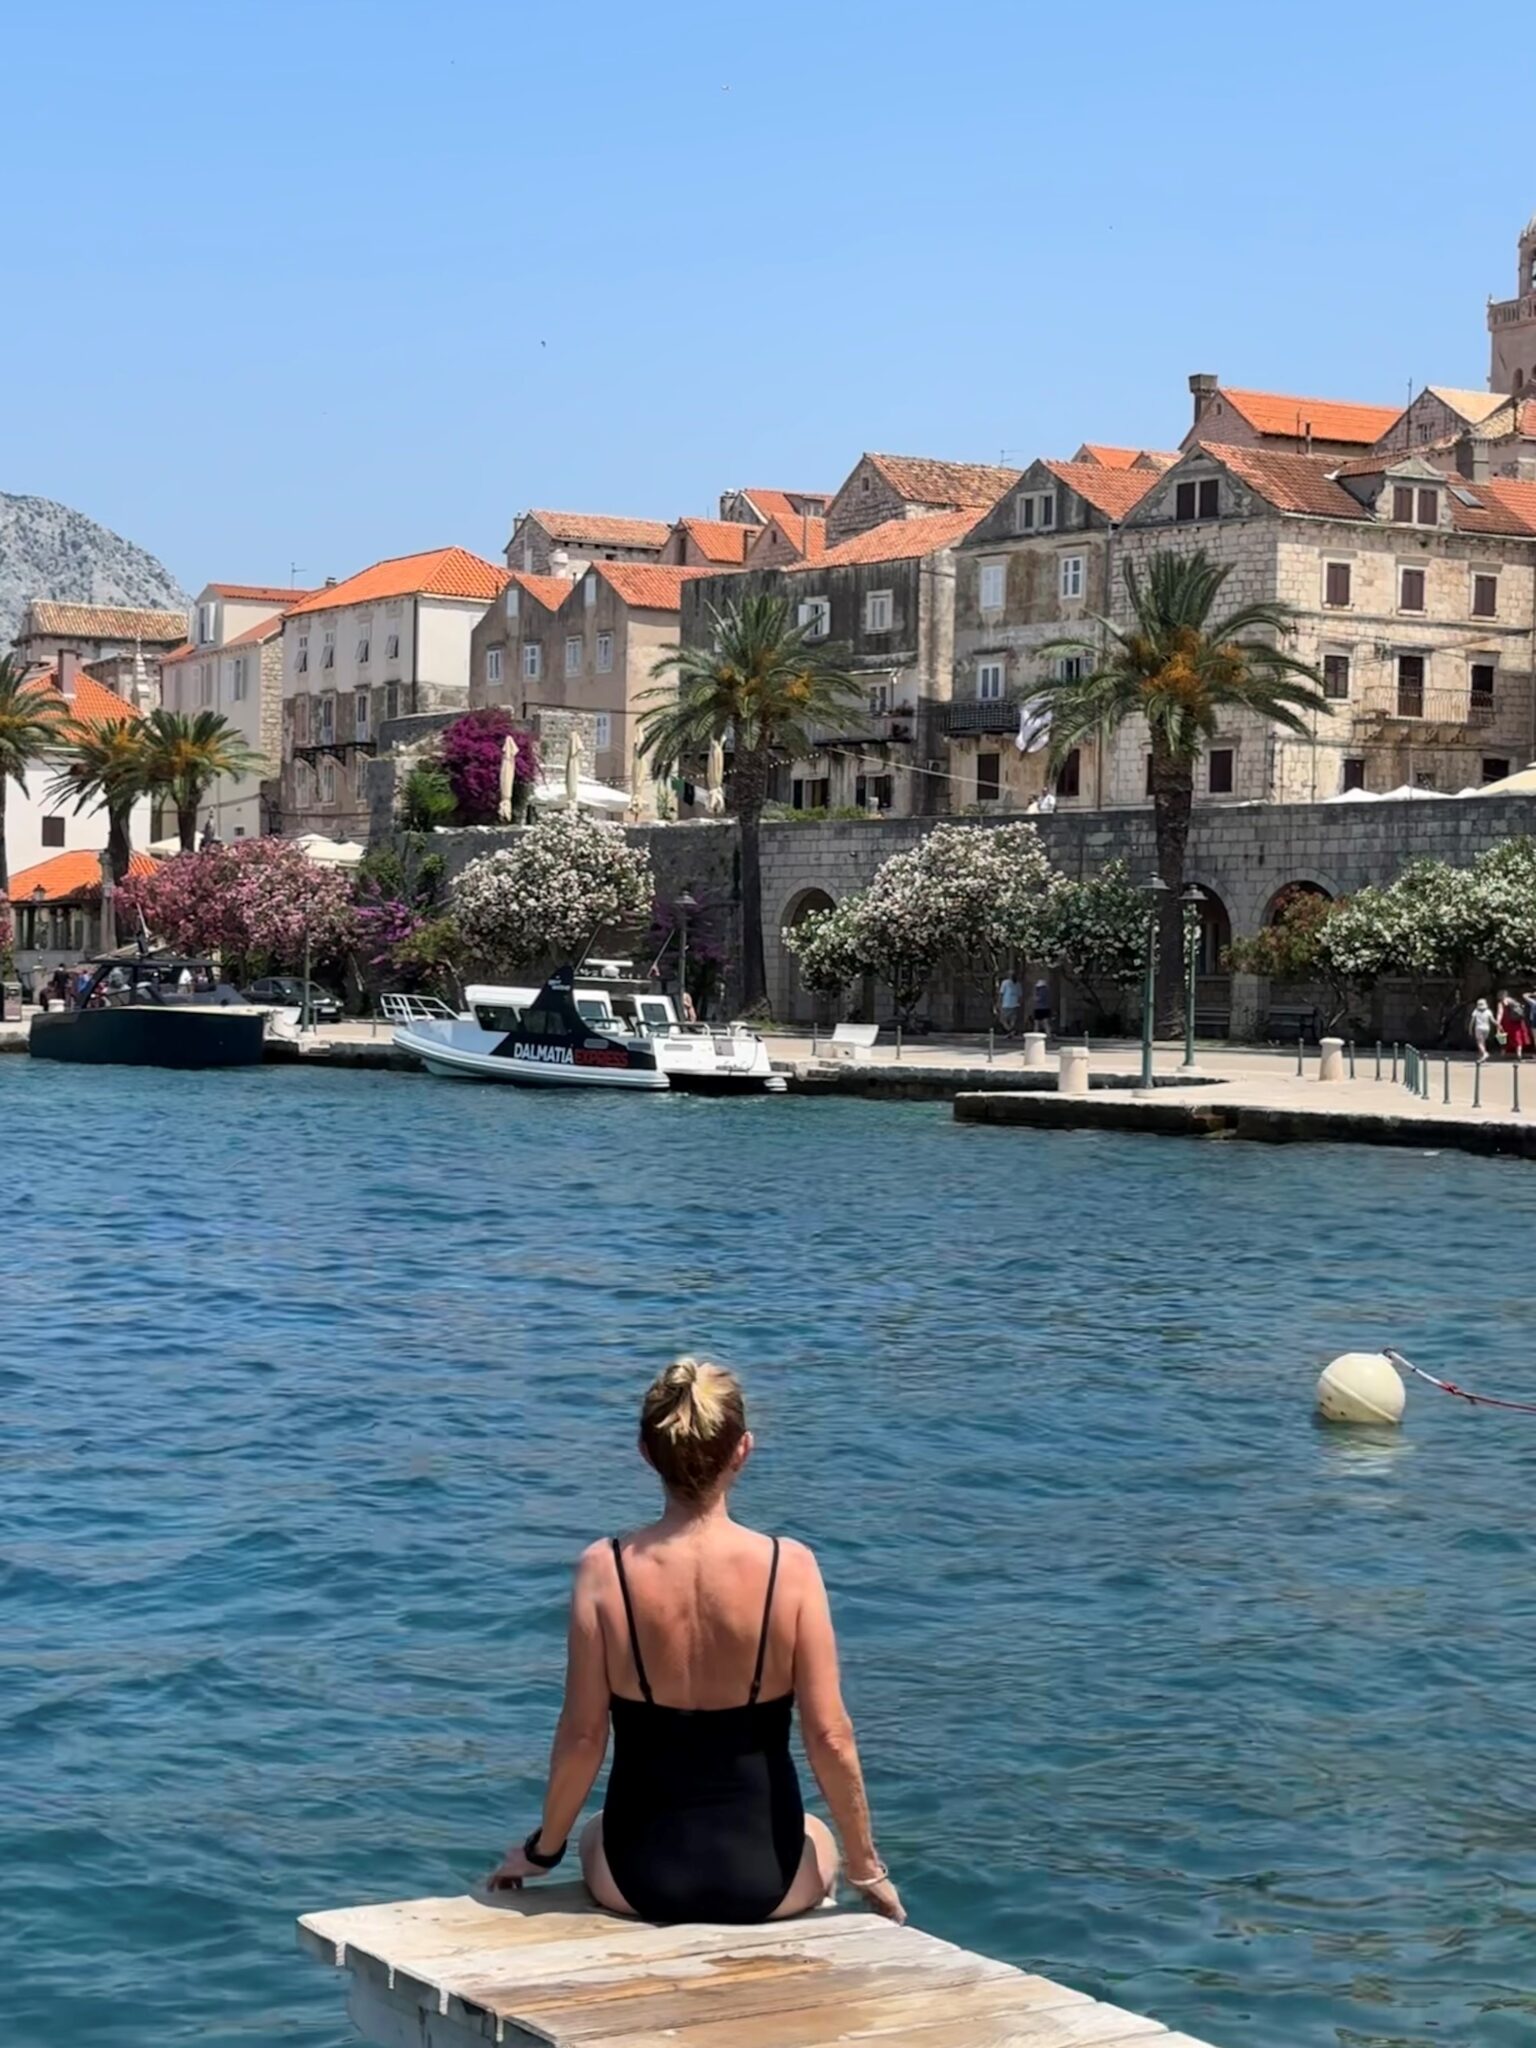 KORCULA ISLAND GUIDE 2023 | EVERYTHING YOU NEED TO KNOW